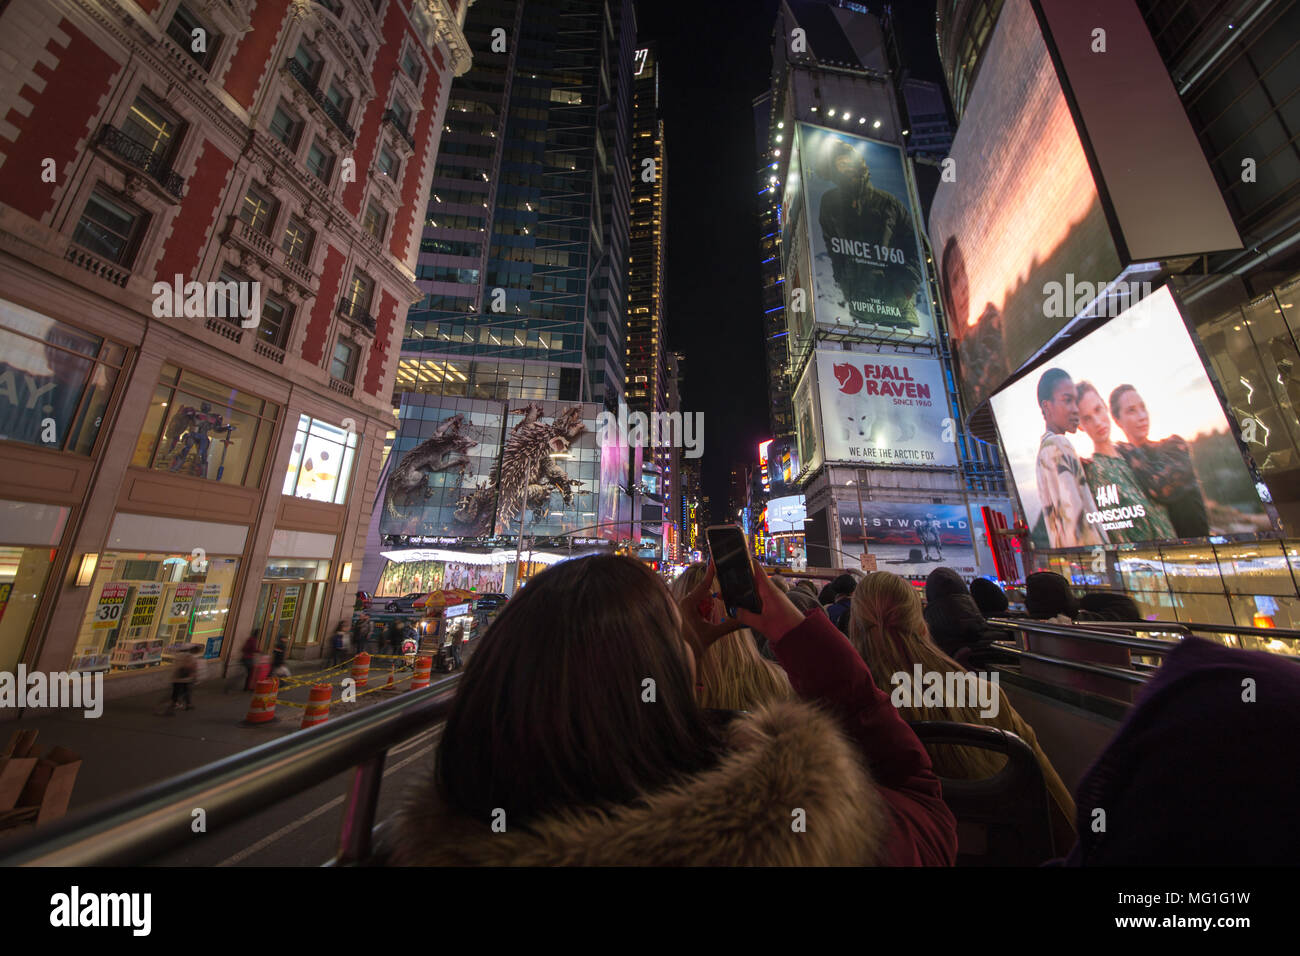 Photo from top of tour bus in New York City Stock Photo